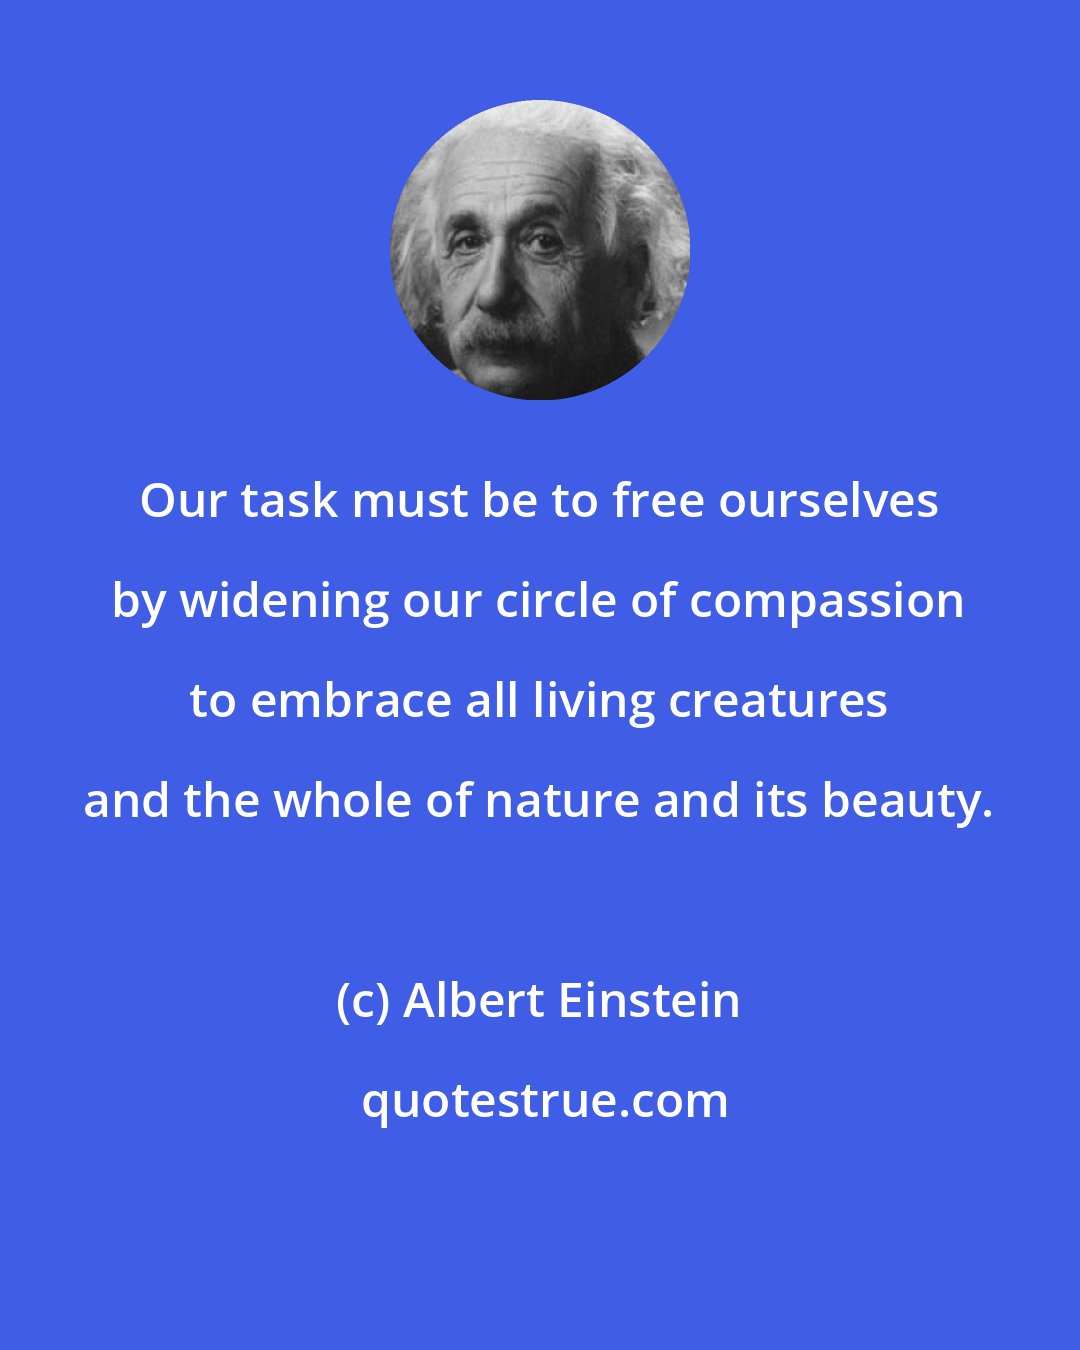 Albert Einstein: Our task must be to free ourselves by widening our circle of compassion to embrace all living creatures and the whole of nature and its beauty.